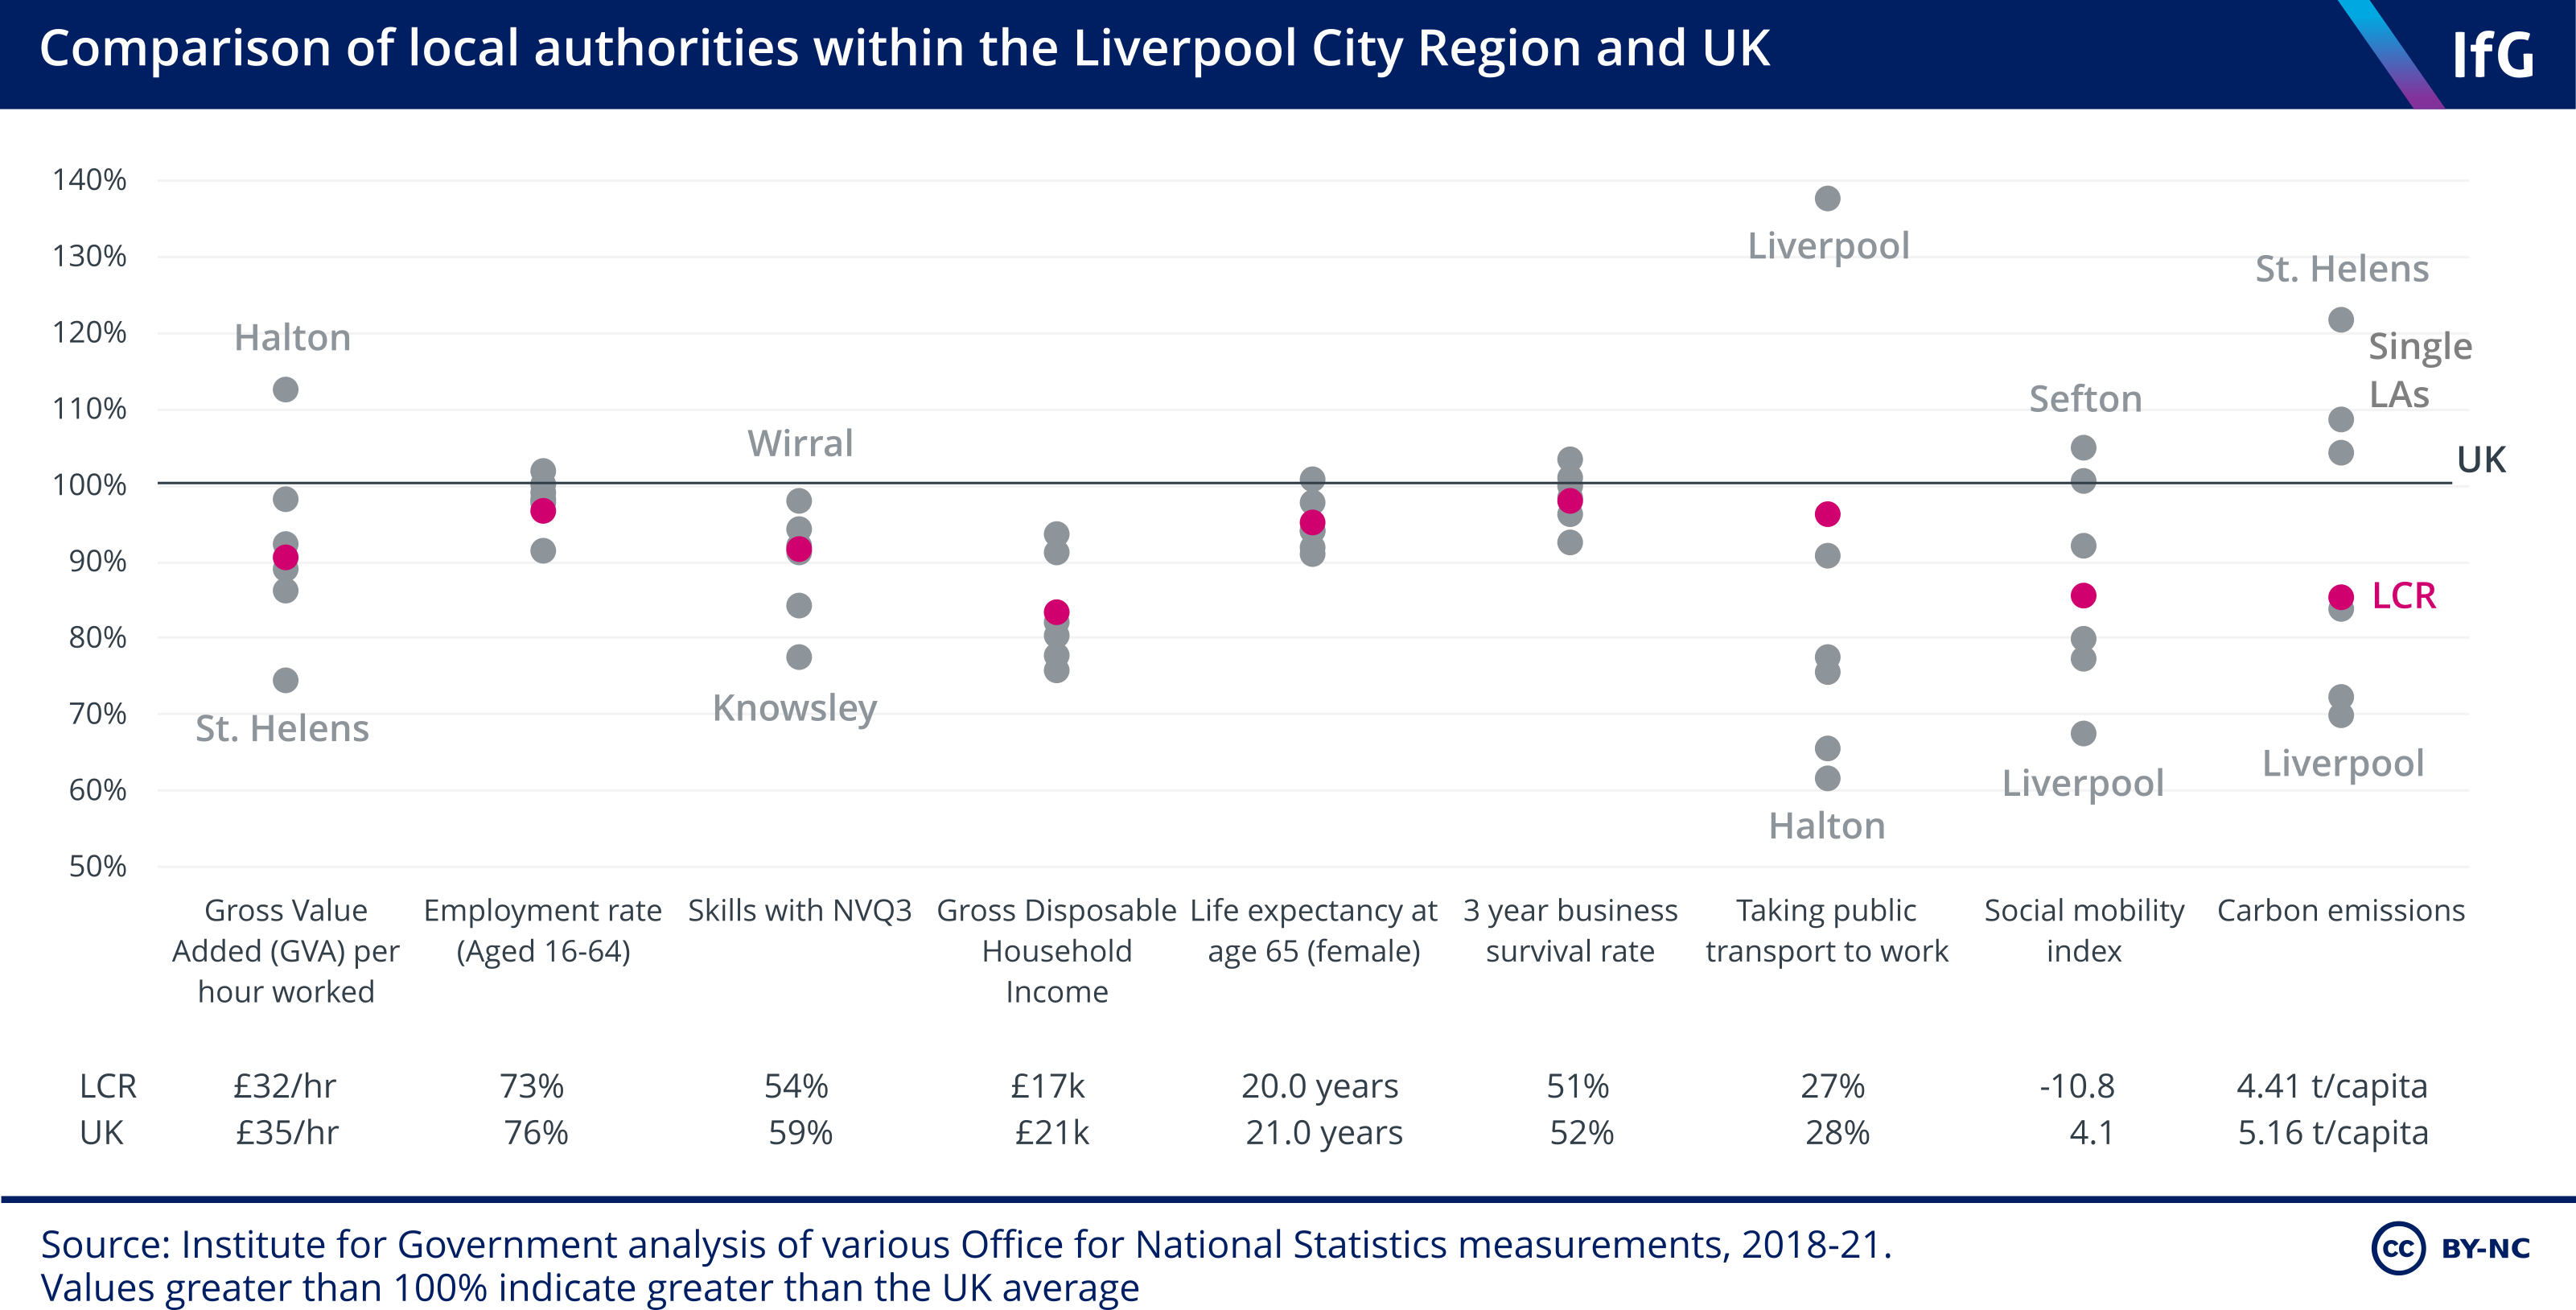 Comparison of local authorities with the LCRCA region and Whole UK as a percentage of the Whole UK value